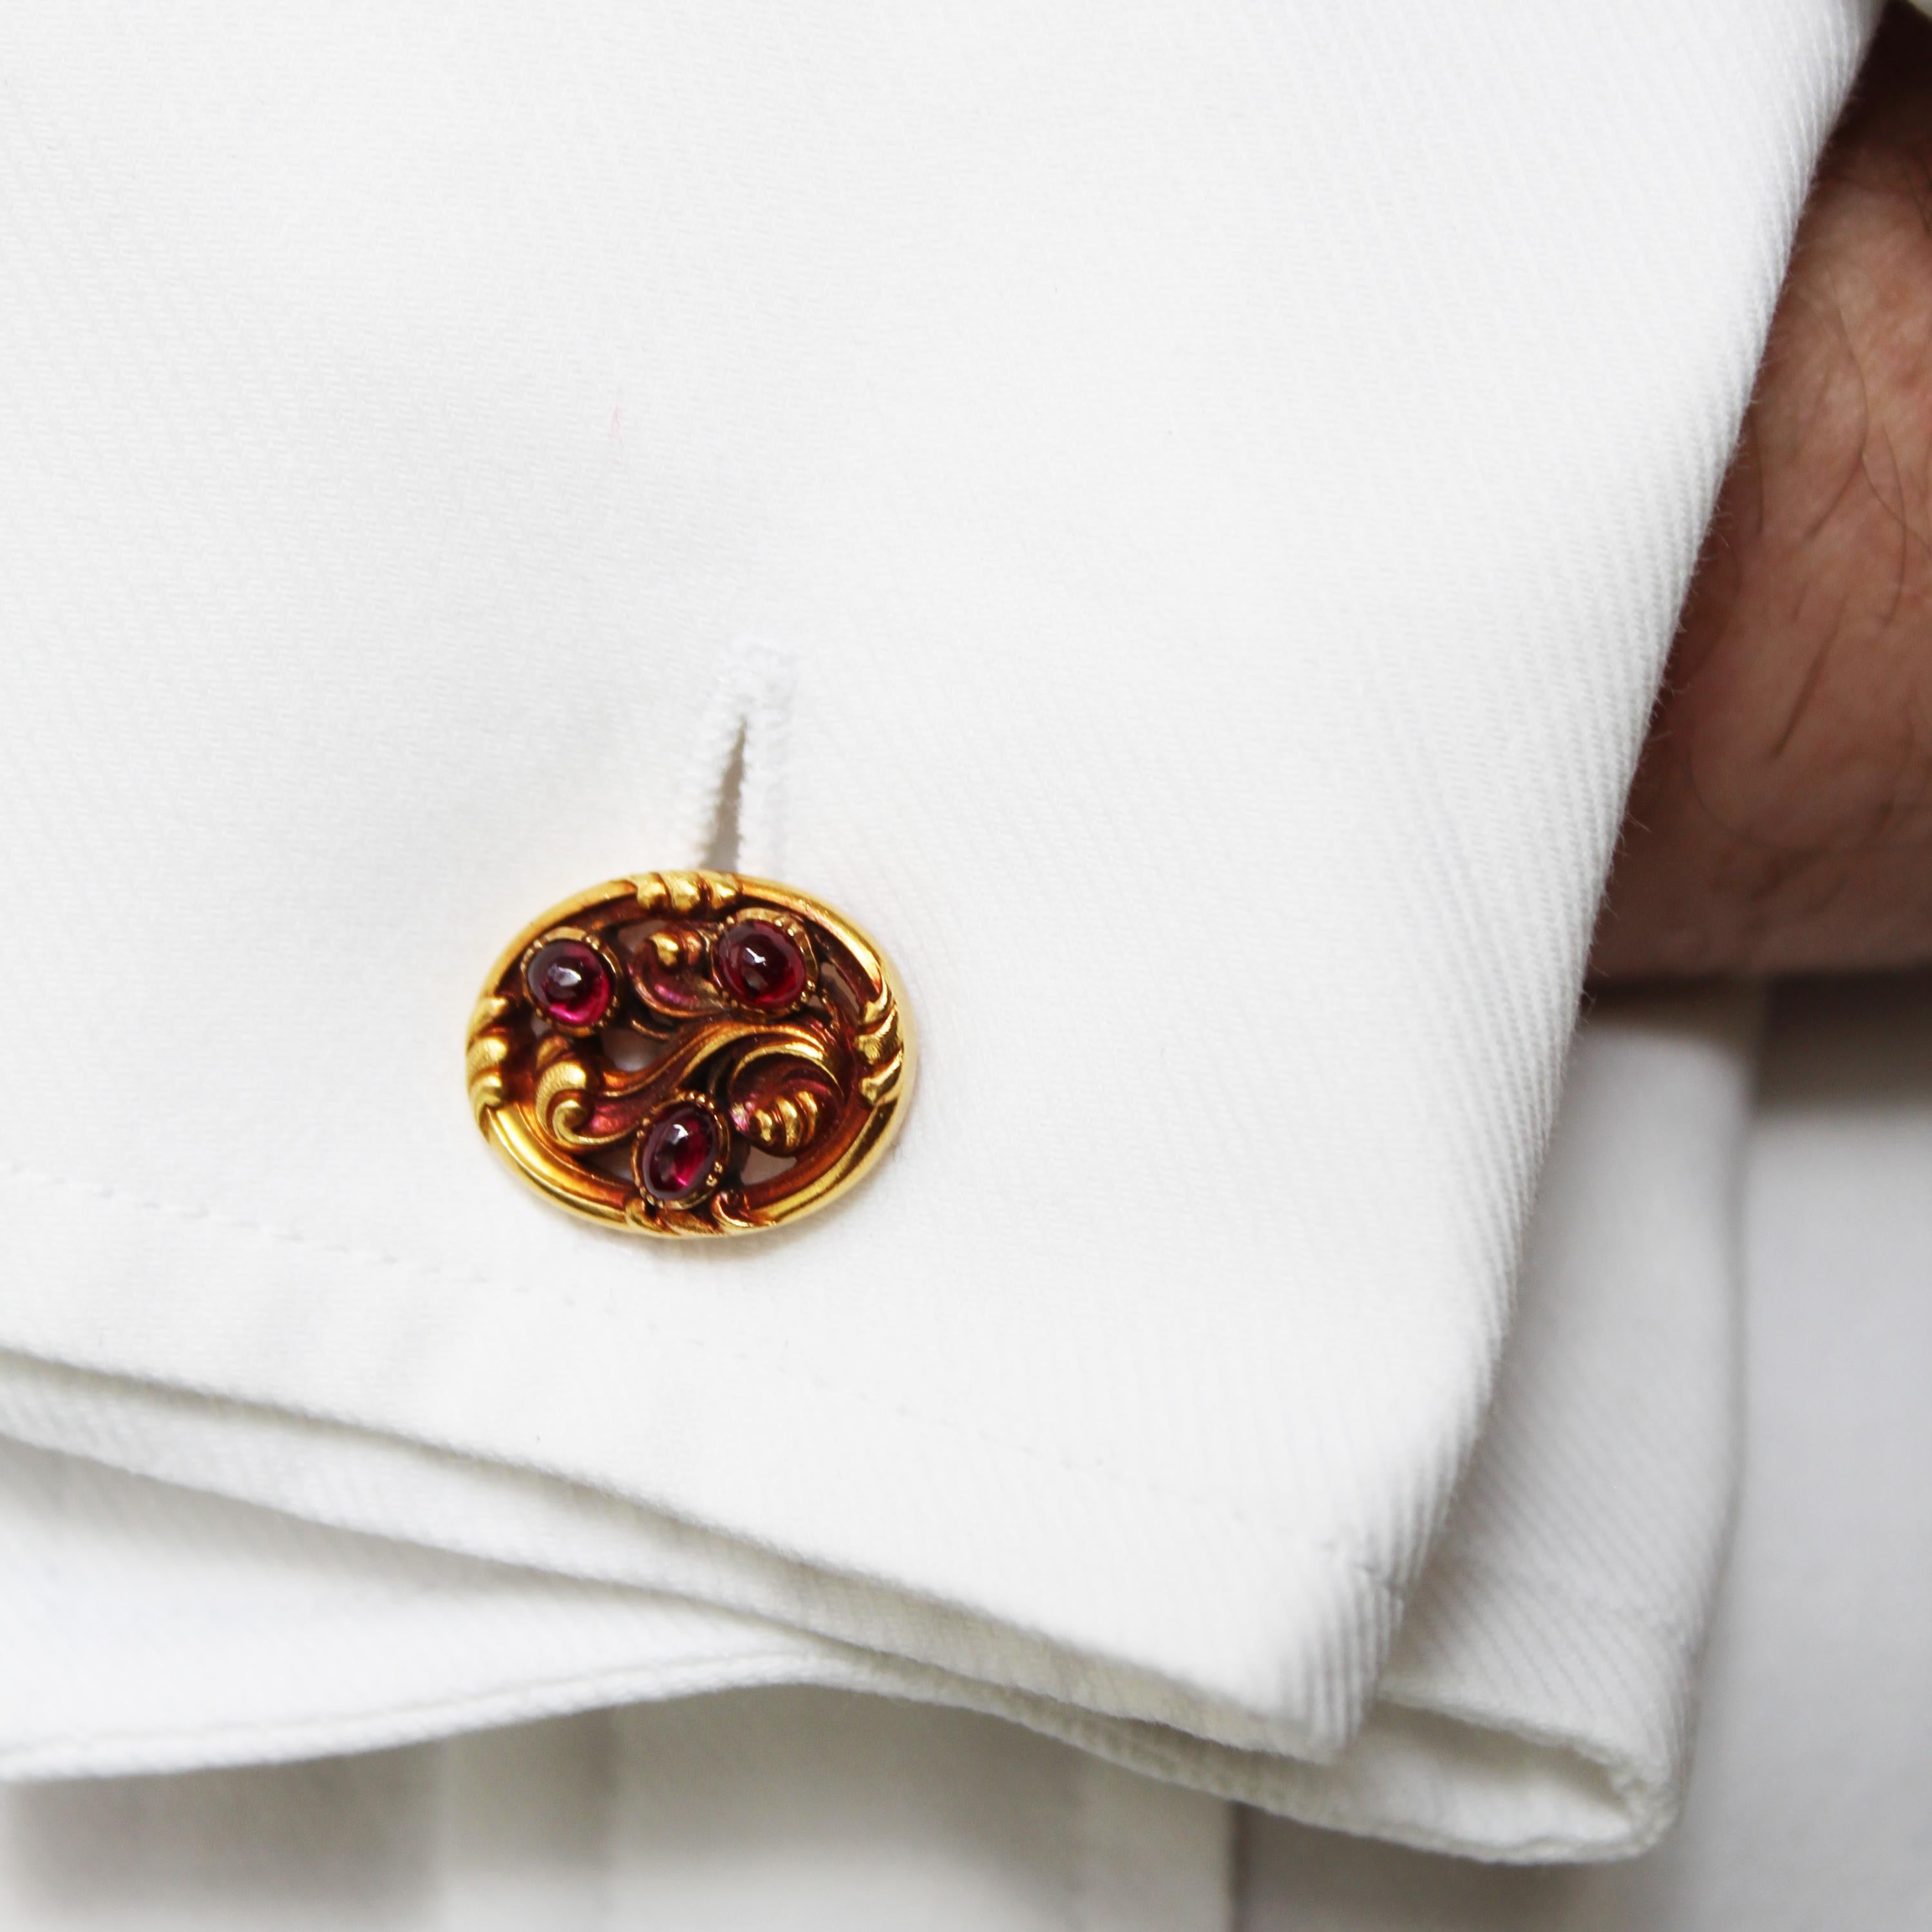 Tiffany & Co. Art Nouveau Sapphire Ruby and Gold Cufflinks, Circa 1890 For Sale 1